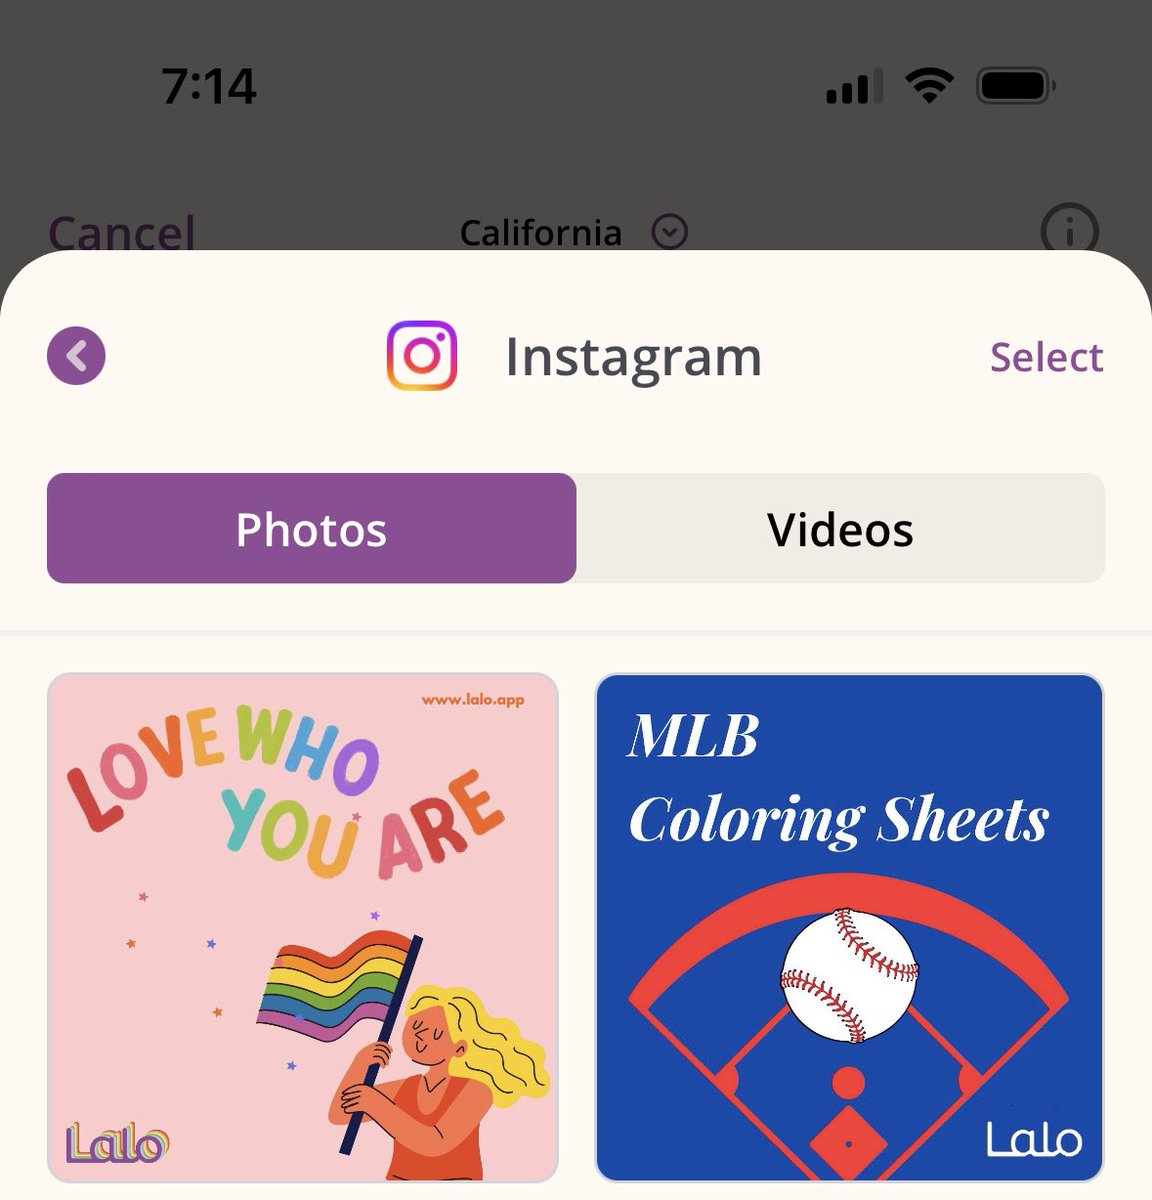 Lalo friends can now access their posts from instagram to share privately with family and friends. 📸 🥰